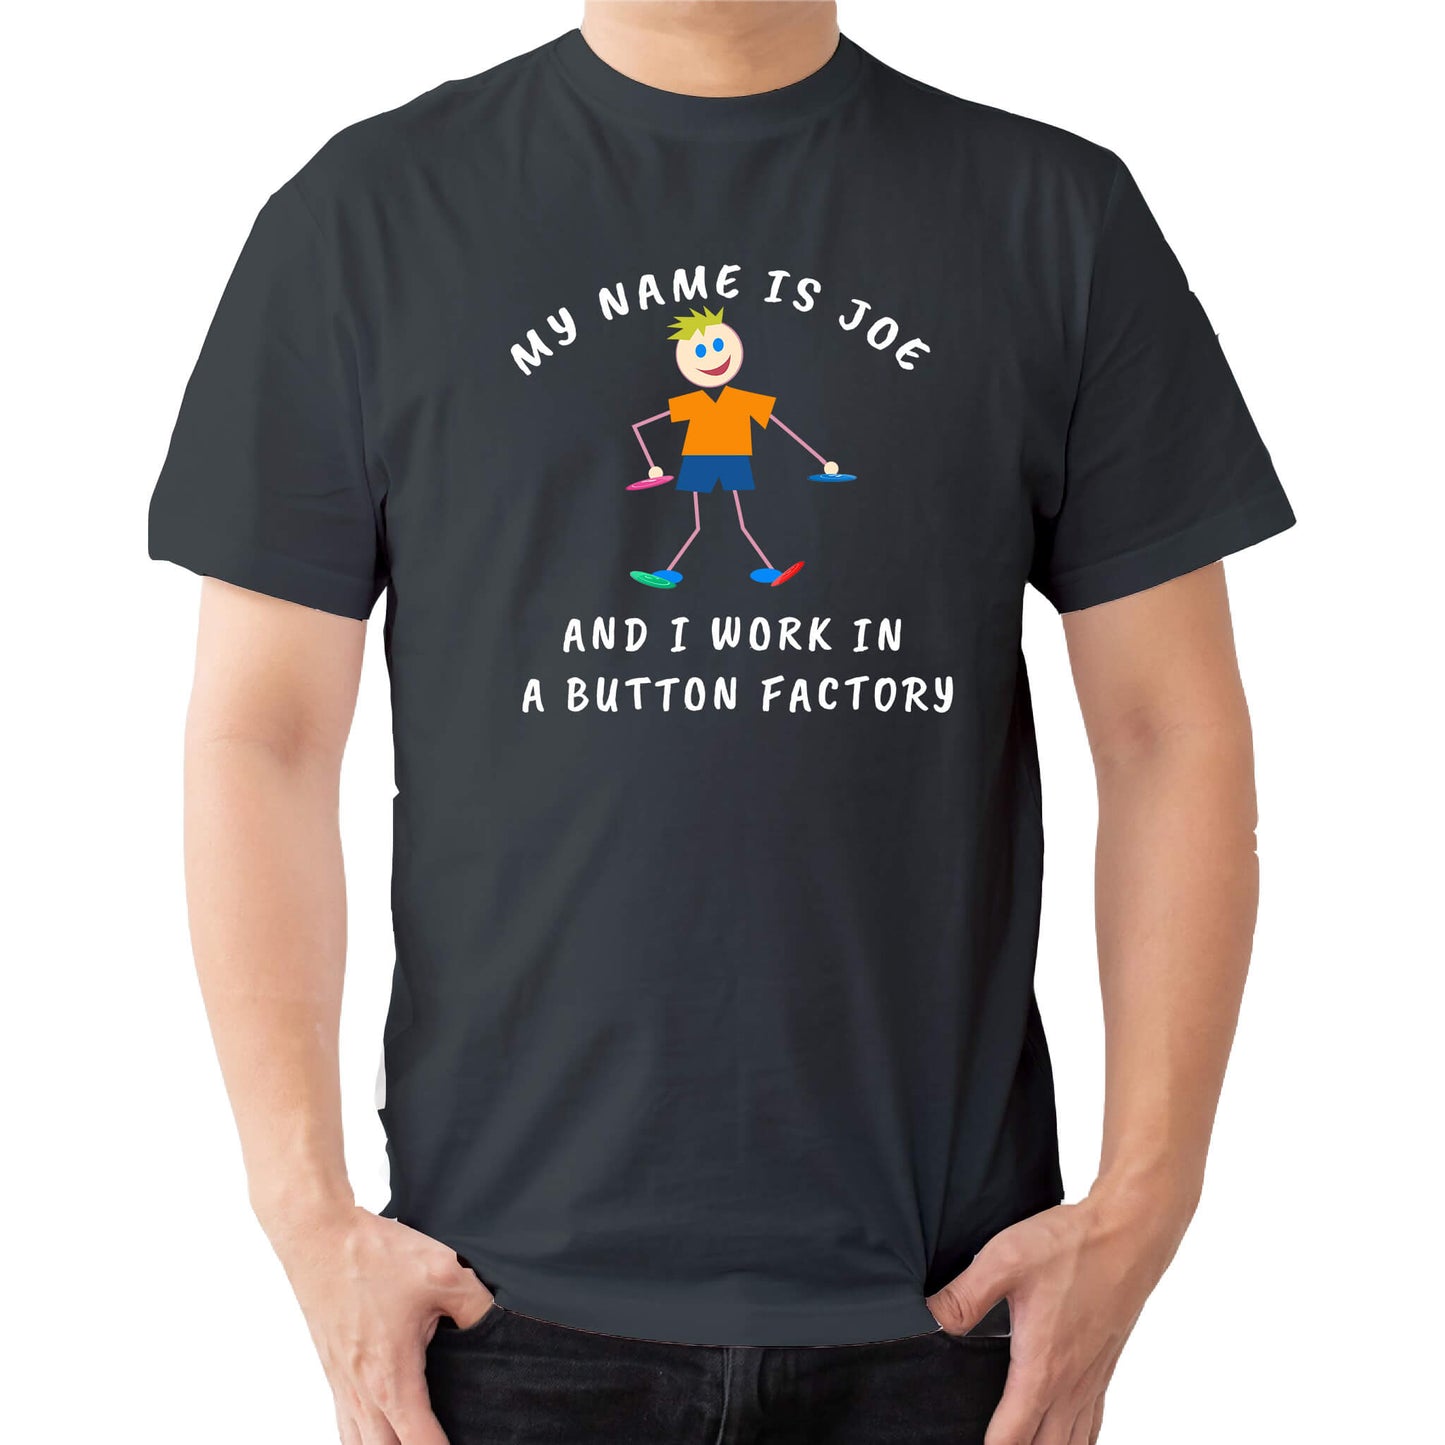 MY NAME IS JO AND I WORK IN A BUTTON FACTORY T-SHIRT black